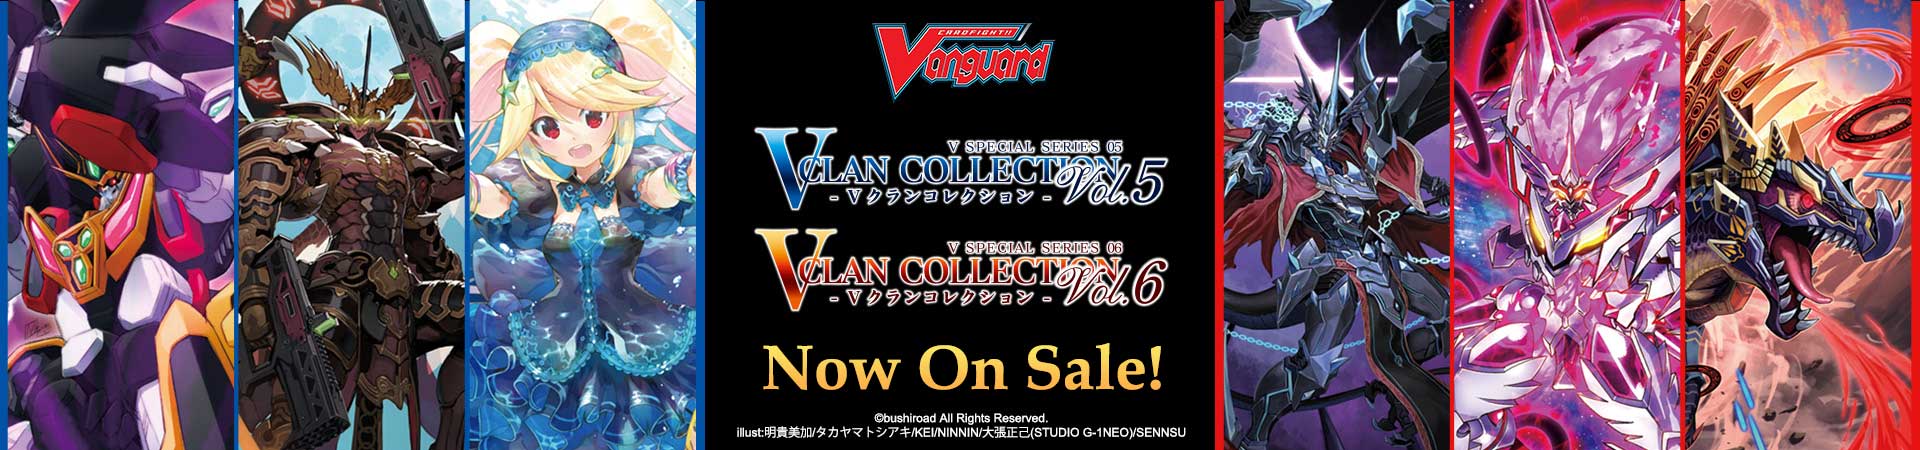 V Special Series: V Clan Collection Vol.5 and Vol.6